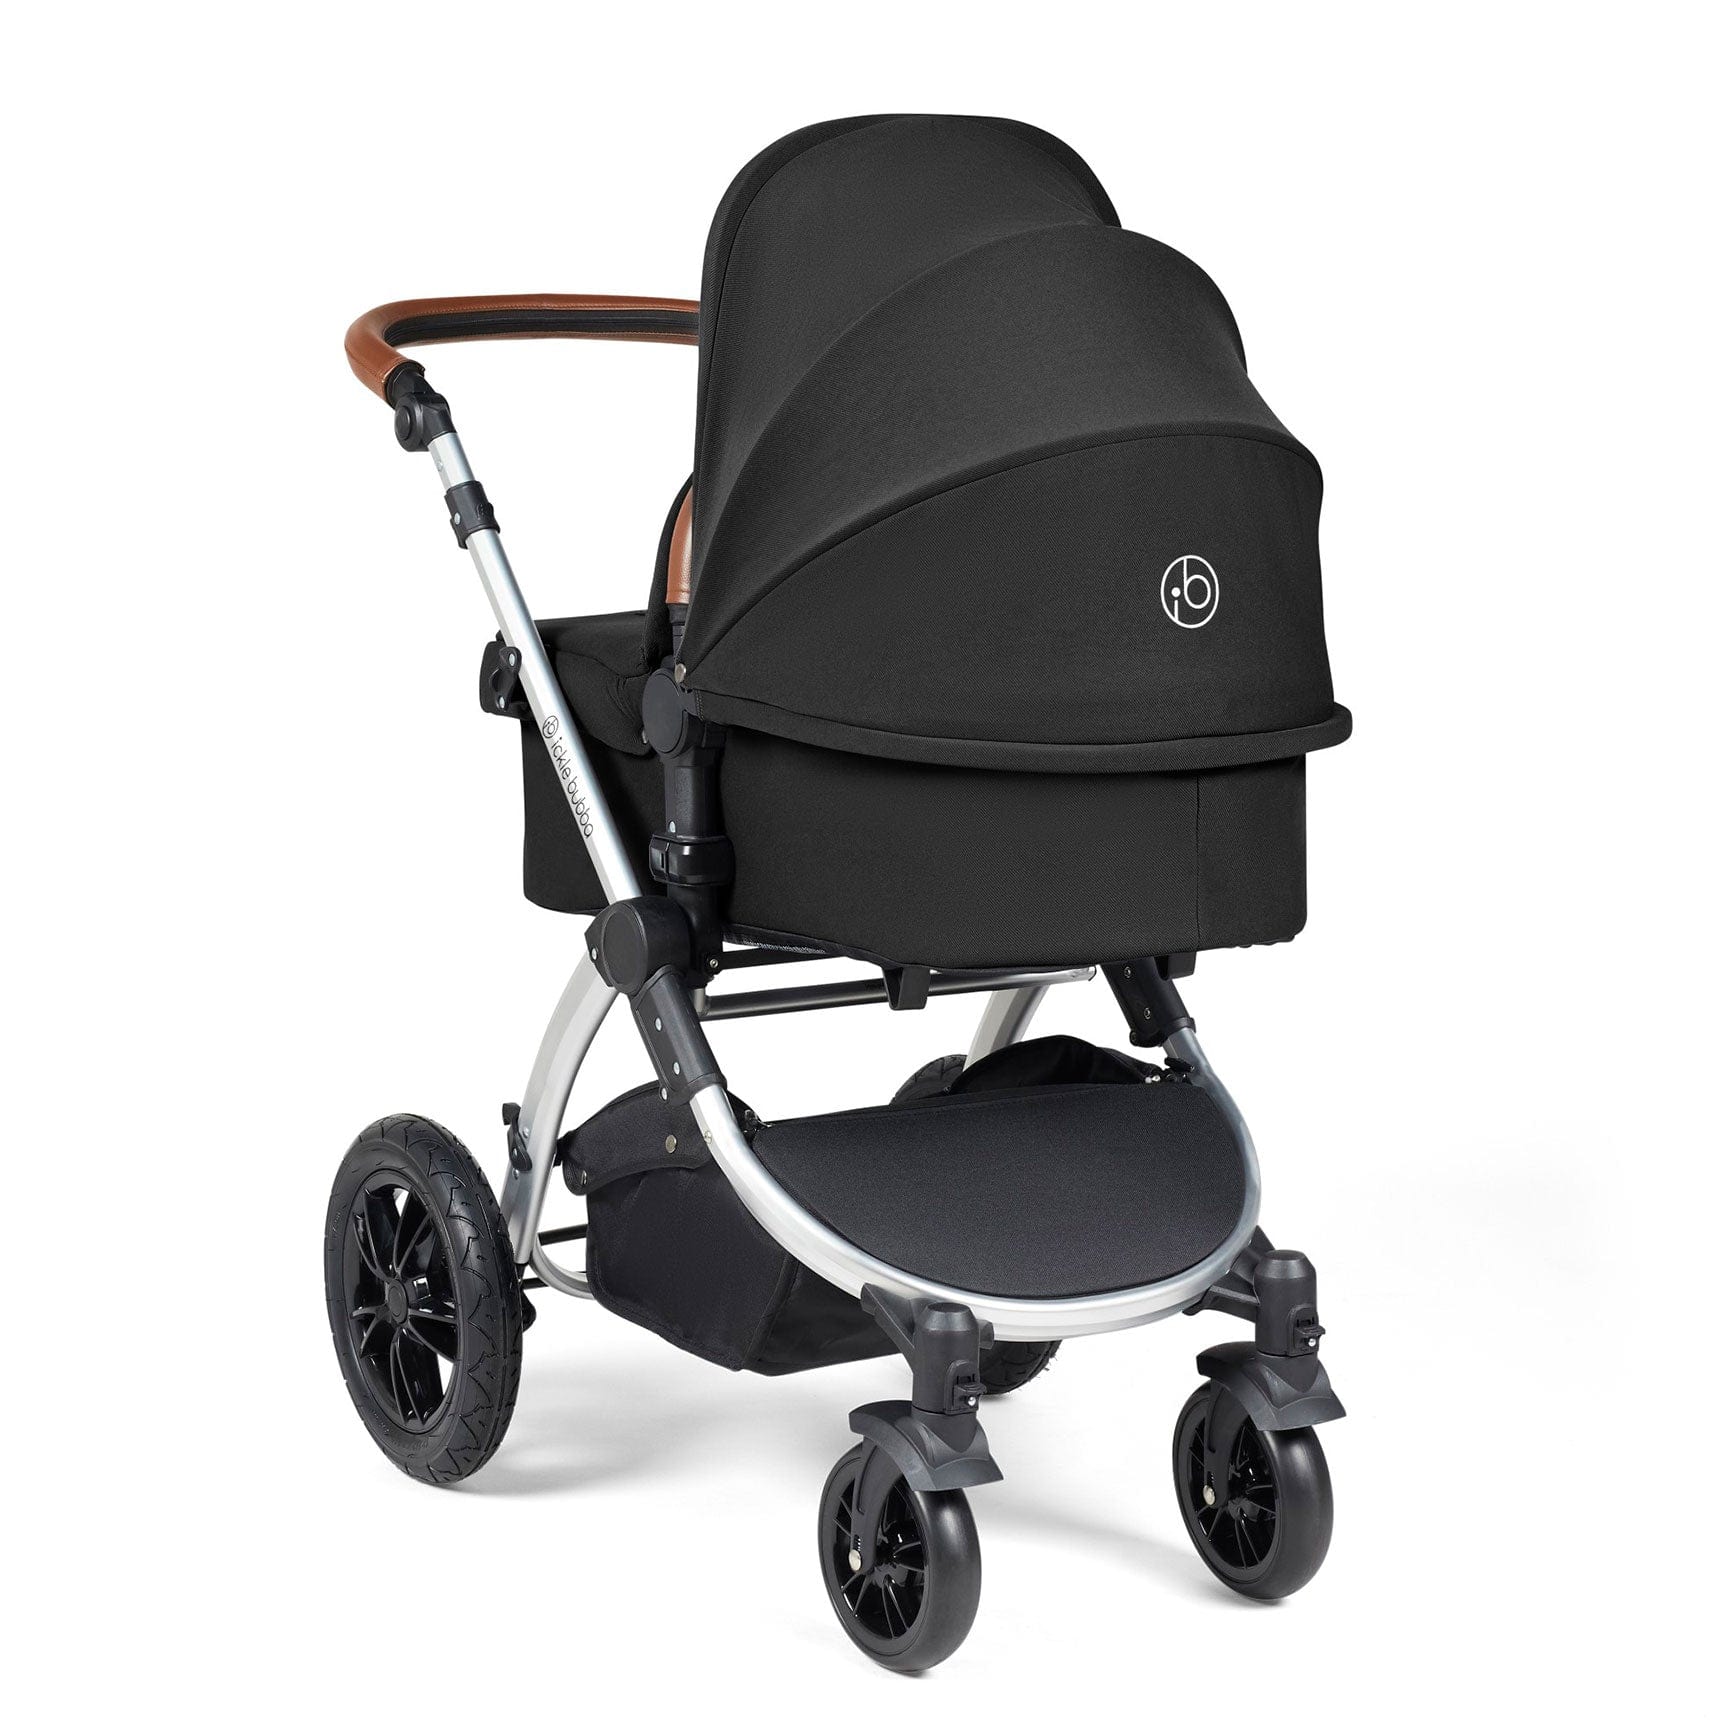 Ickle Bubba travel systems Ickle Bubba Stomp Luxe All-in-One Travel System with Isofix Base - Silver/Midnight/Tan 10-011-300-250